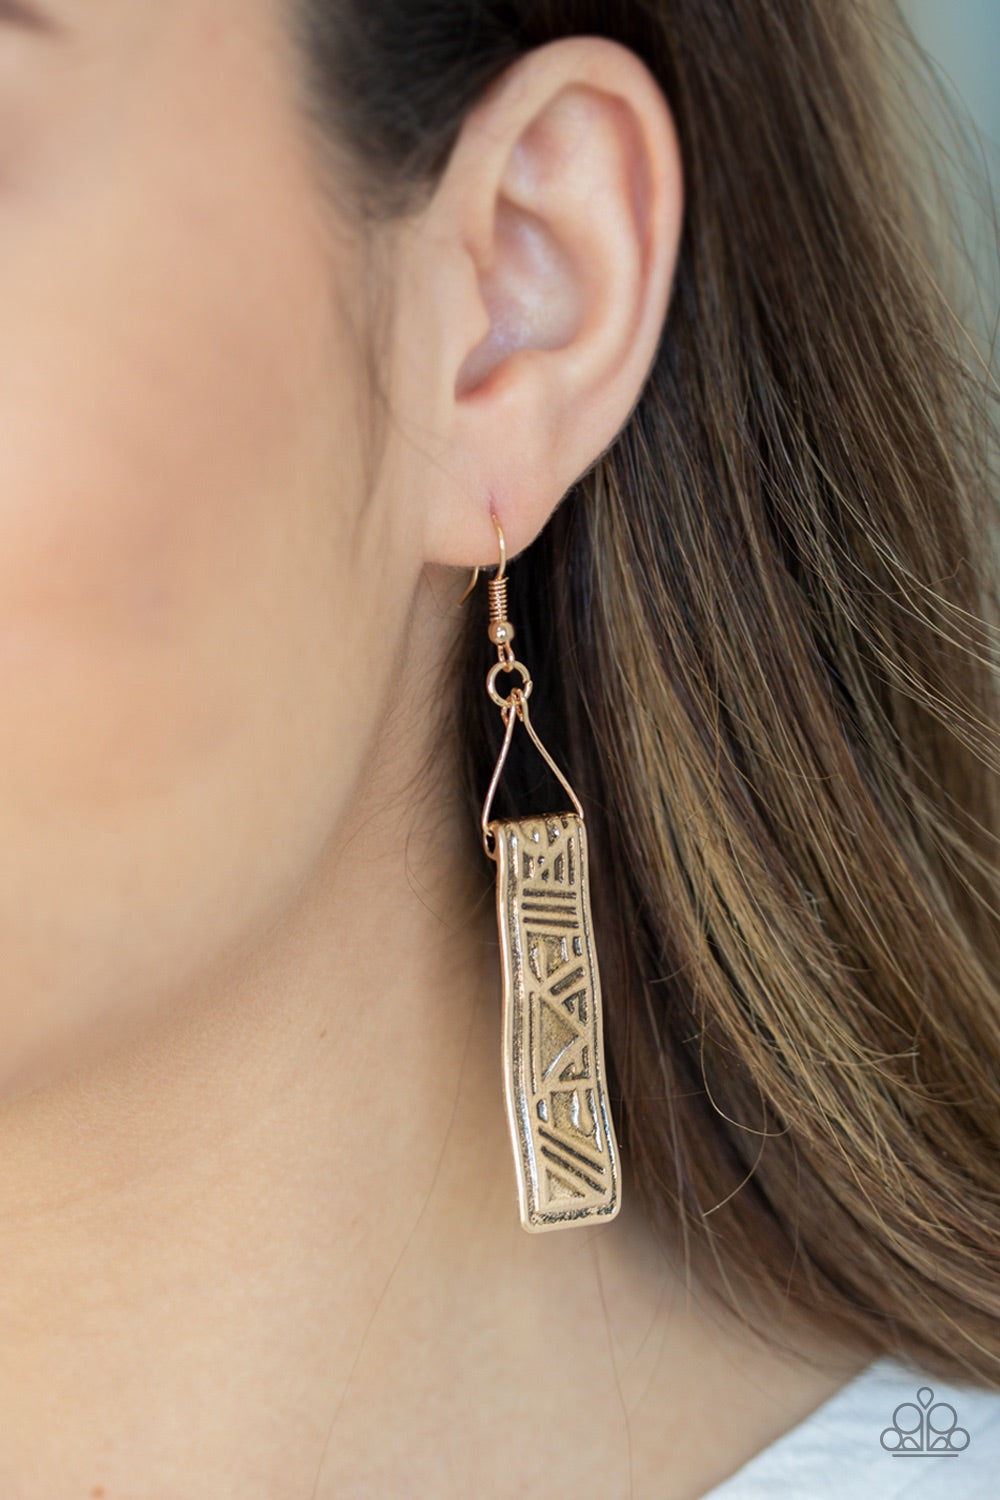 Paparazzi Jewelry Earrings Ancient Artifacts - Gold